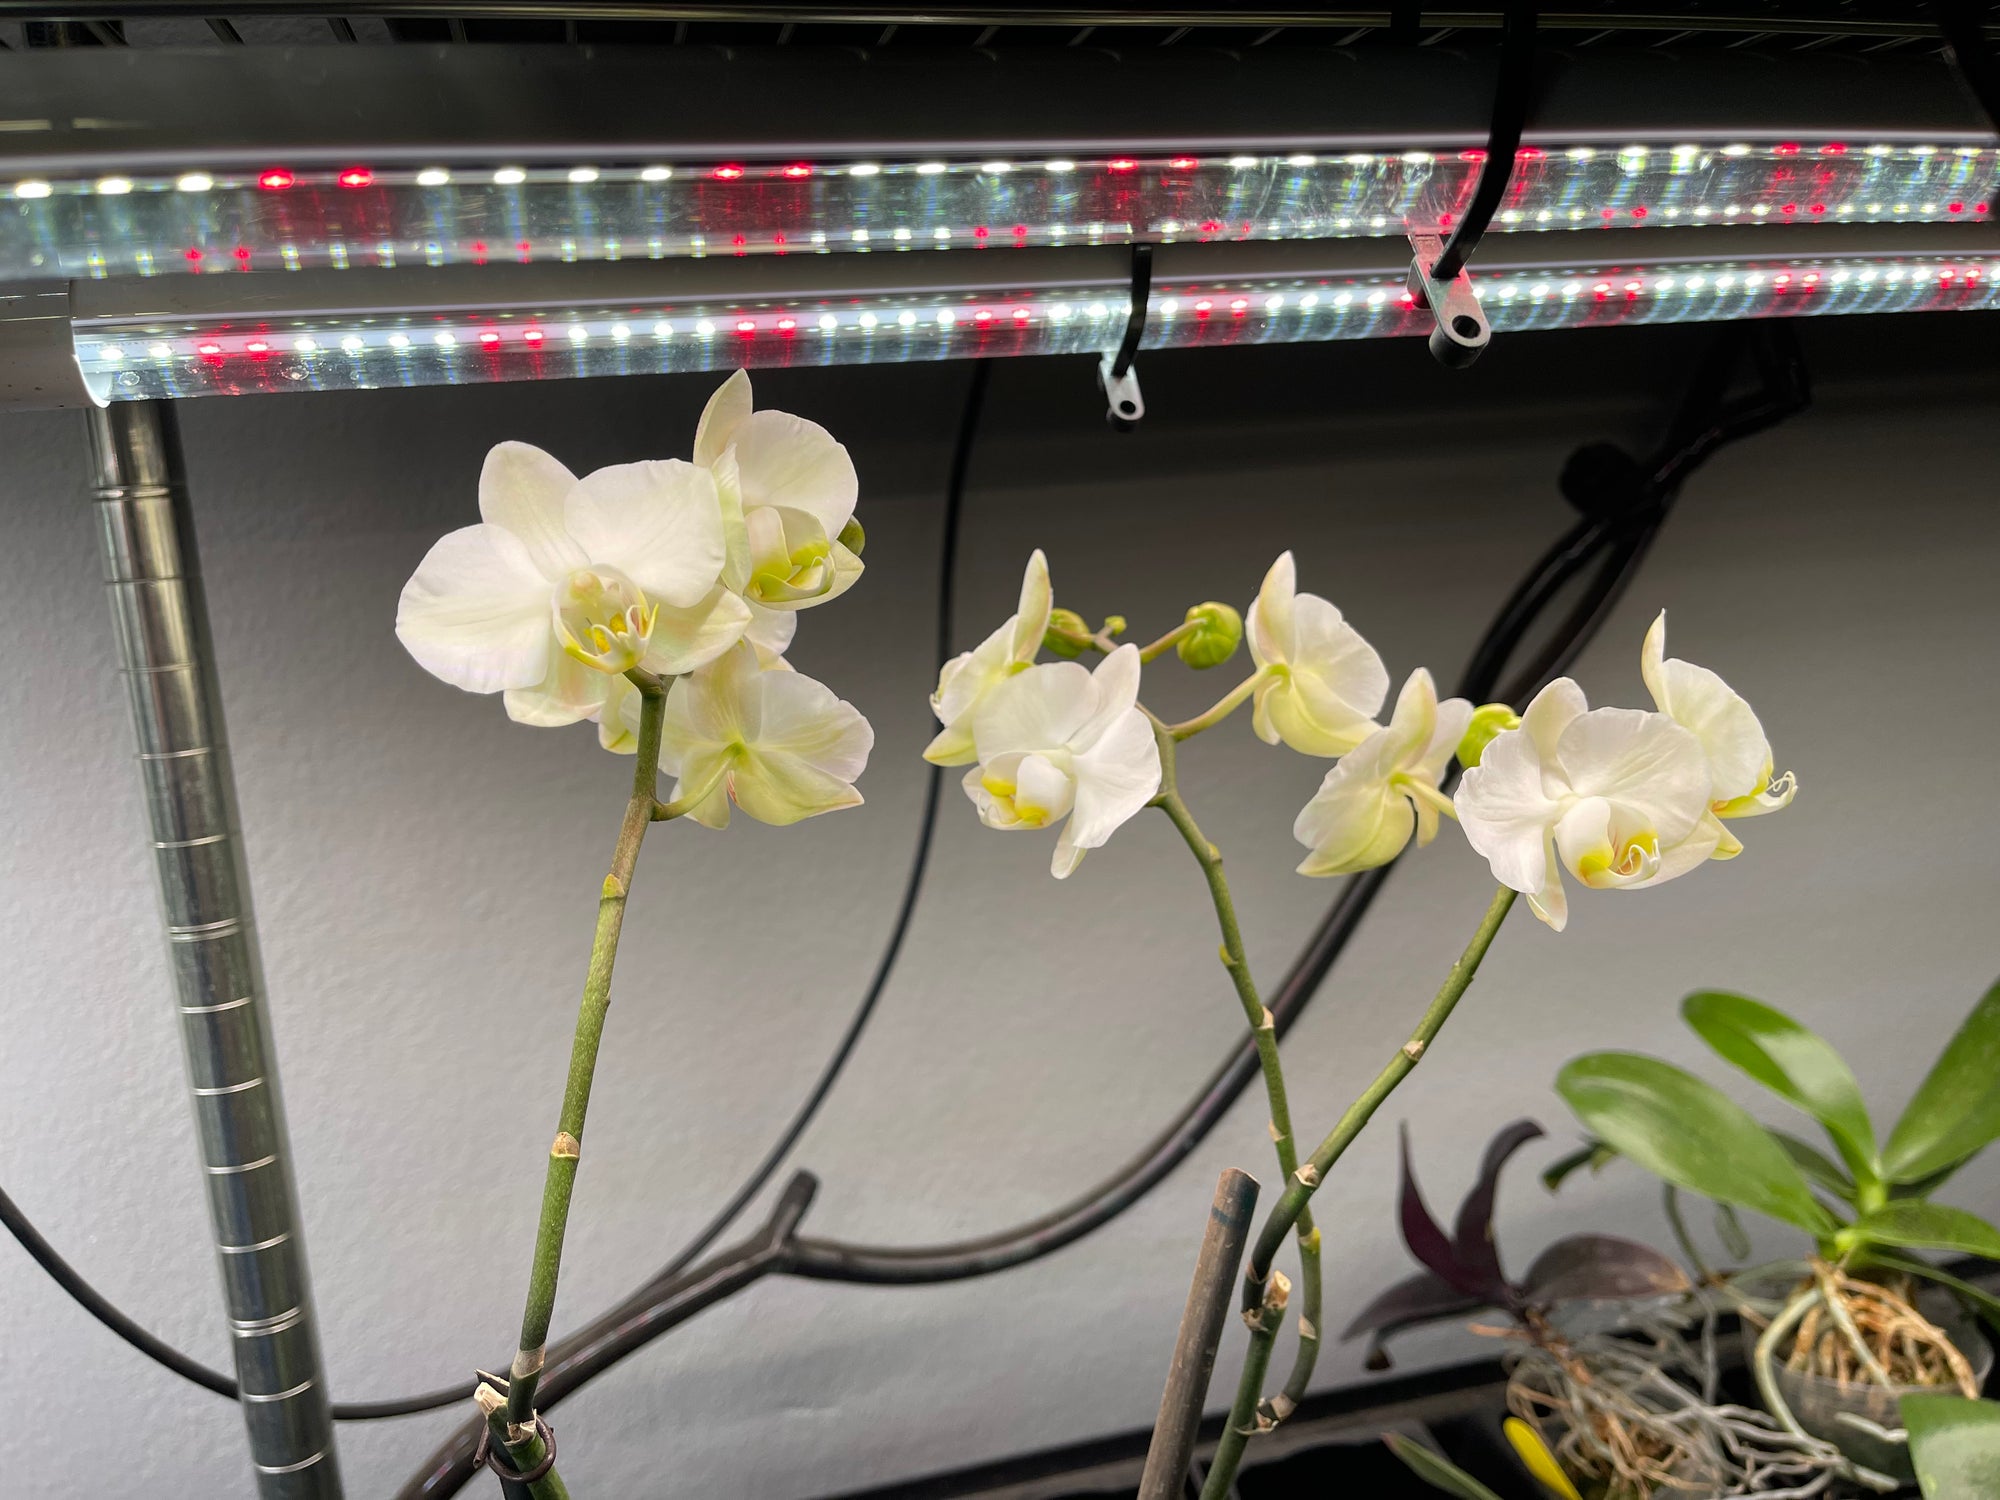 Will my spikes/flowers be harmed if they get too close to the LEDs?